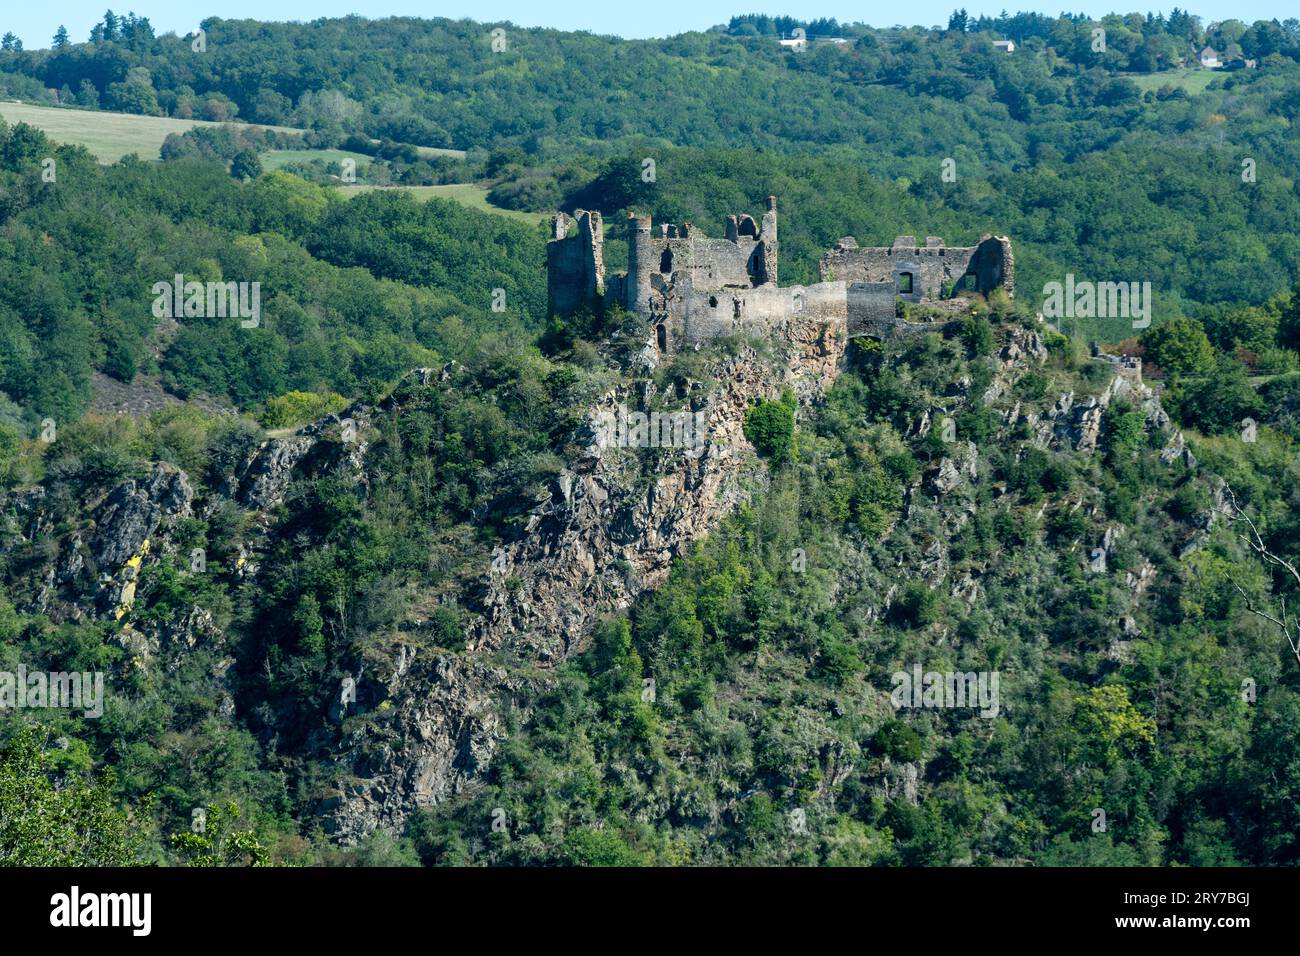 Village of Saint-Remy-de-Biot, the medieval castle in ruins of Chateau Rocher (15th century) overlooks the soul valley, Puy de Dome, Auvergne, France Stock Photo